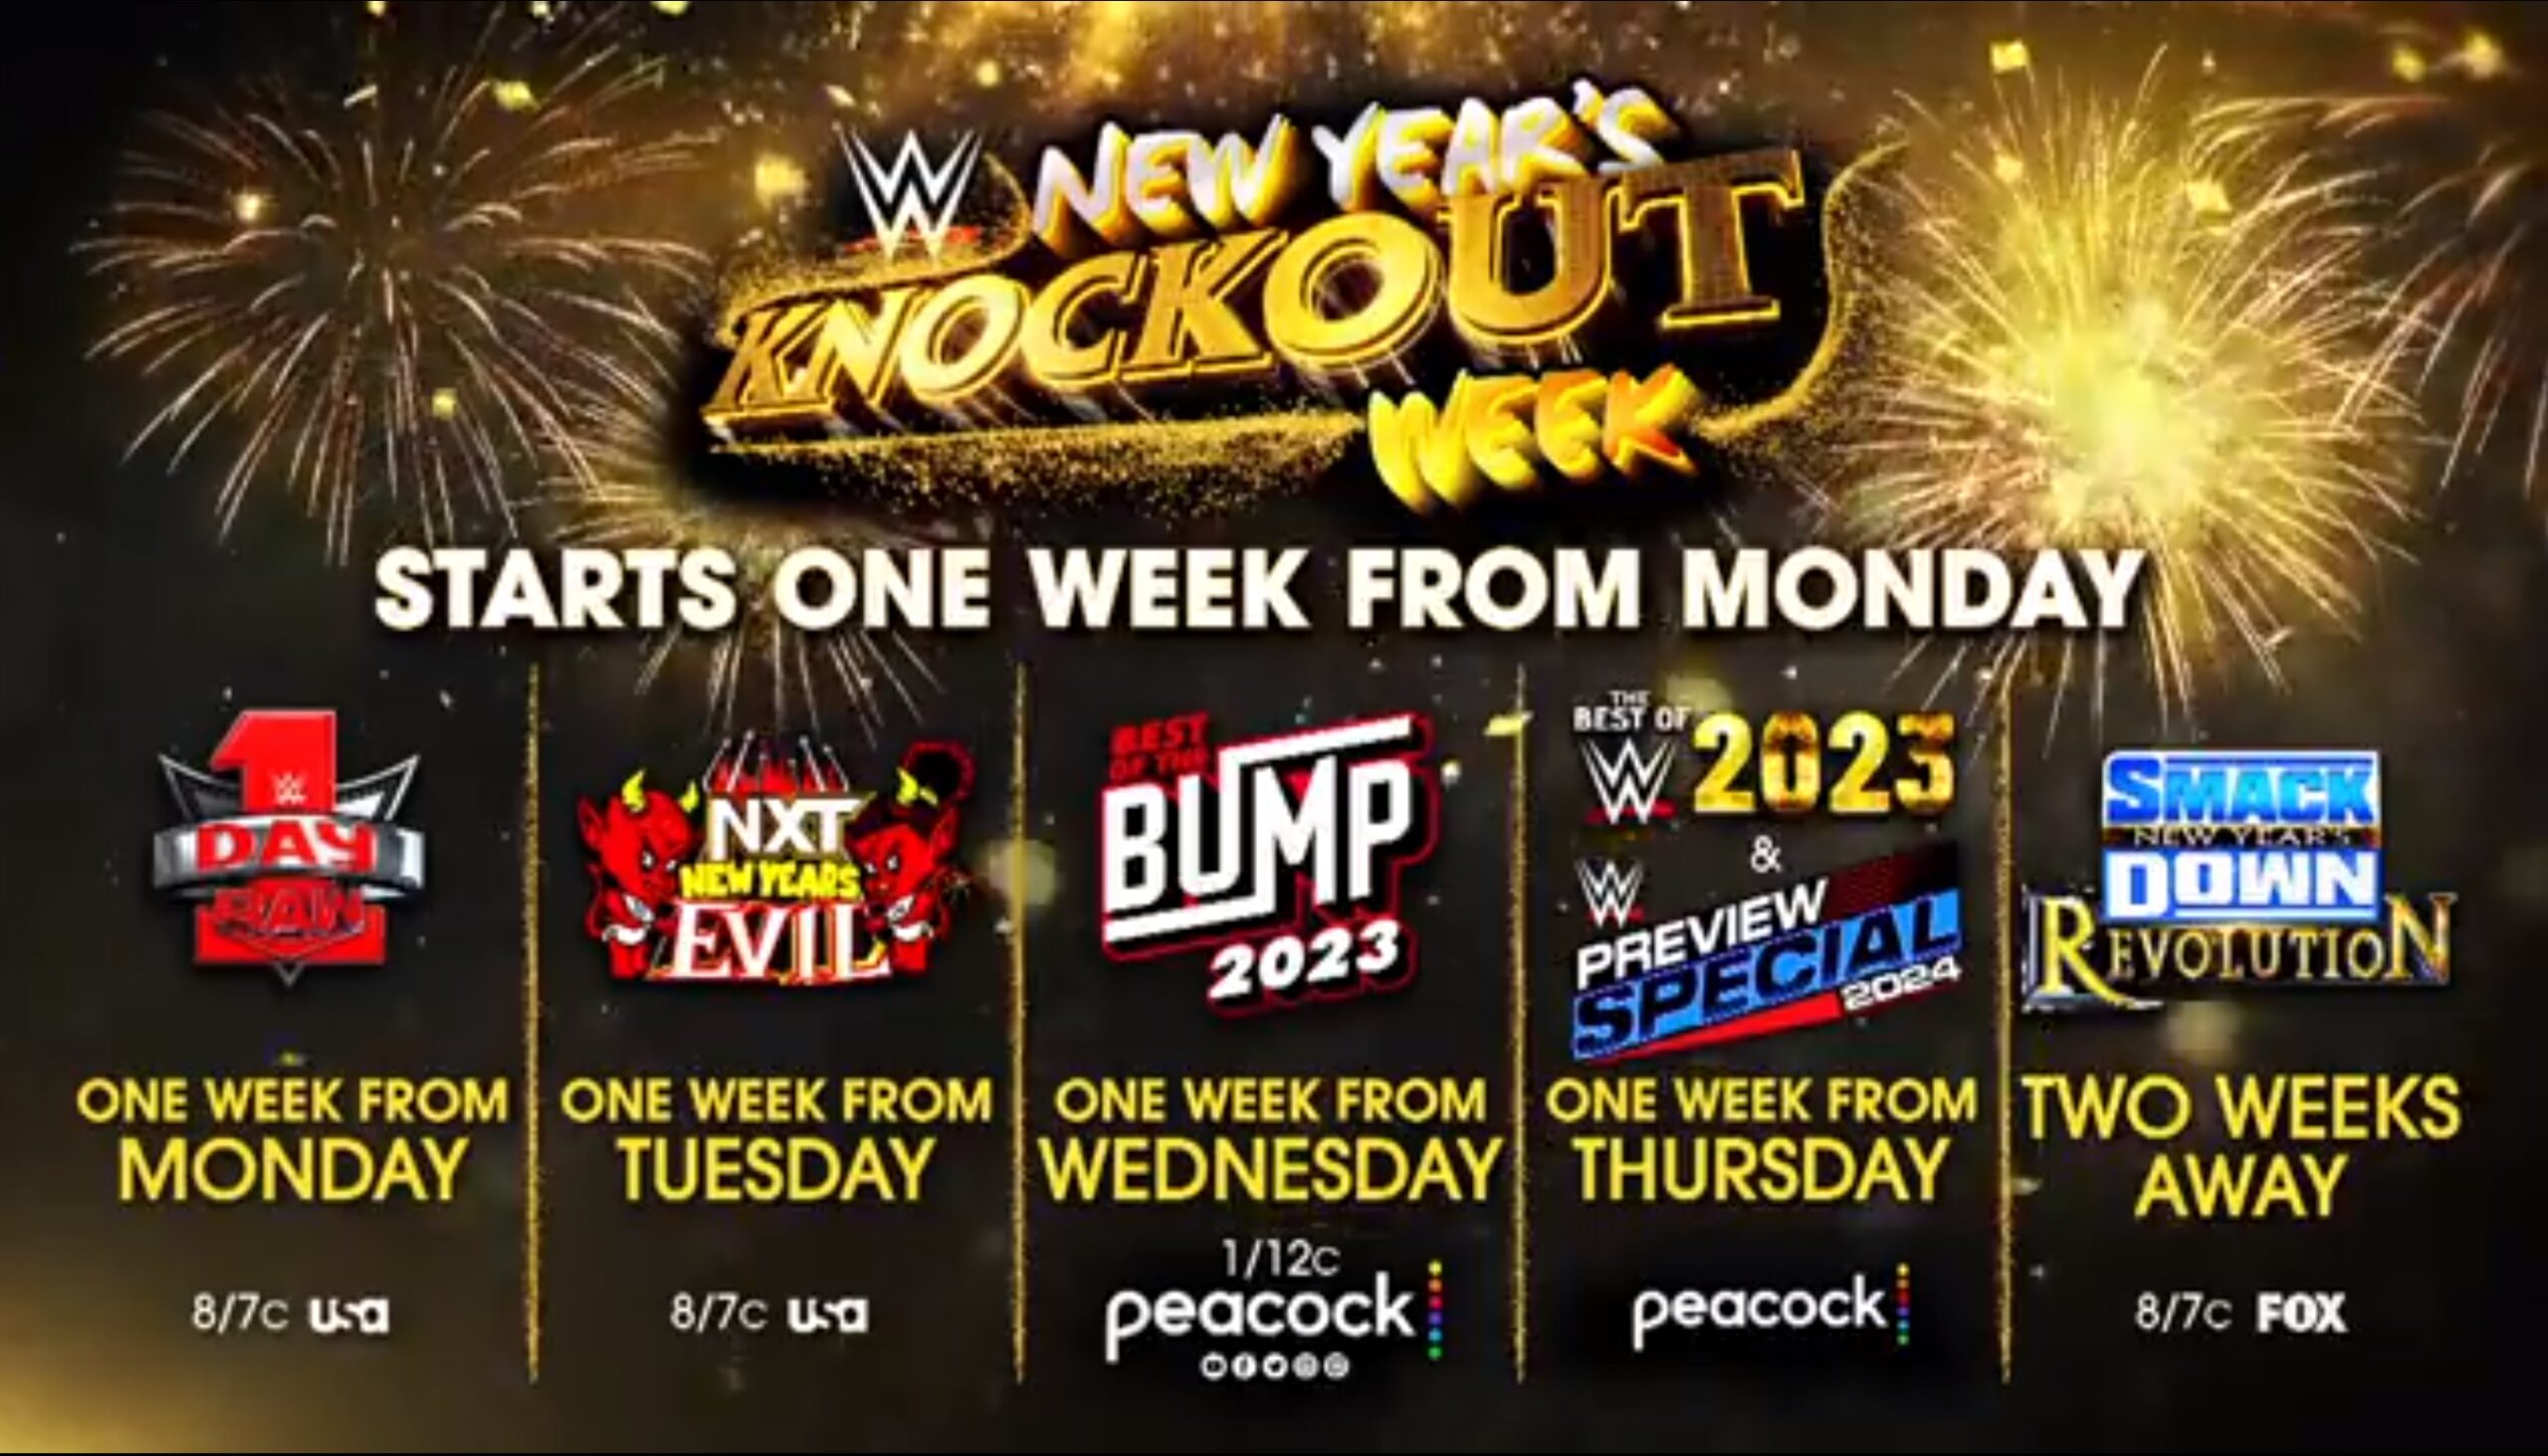 Triple H Announces WWE New Year's Knockout Week Of Special Programming